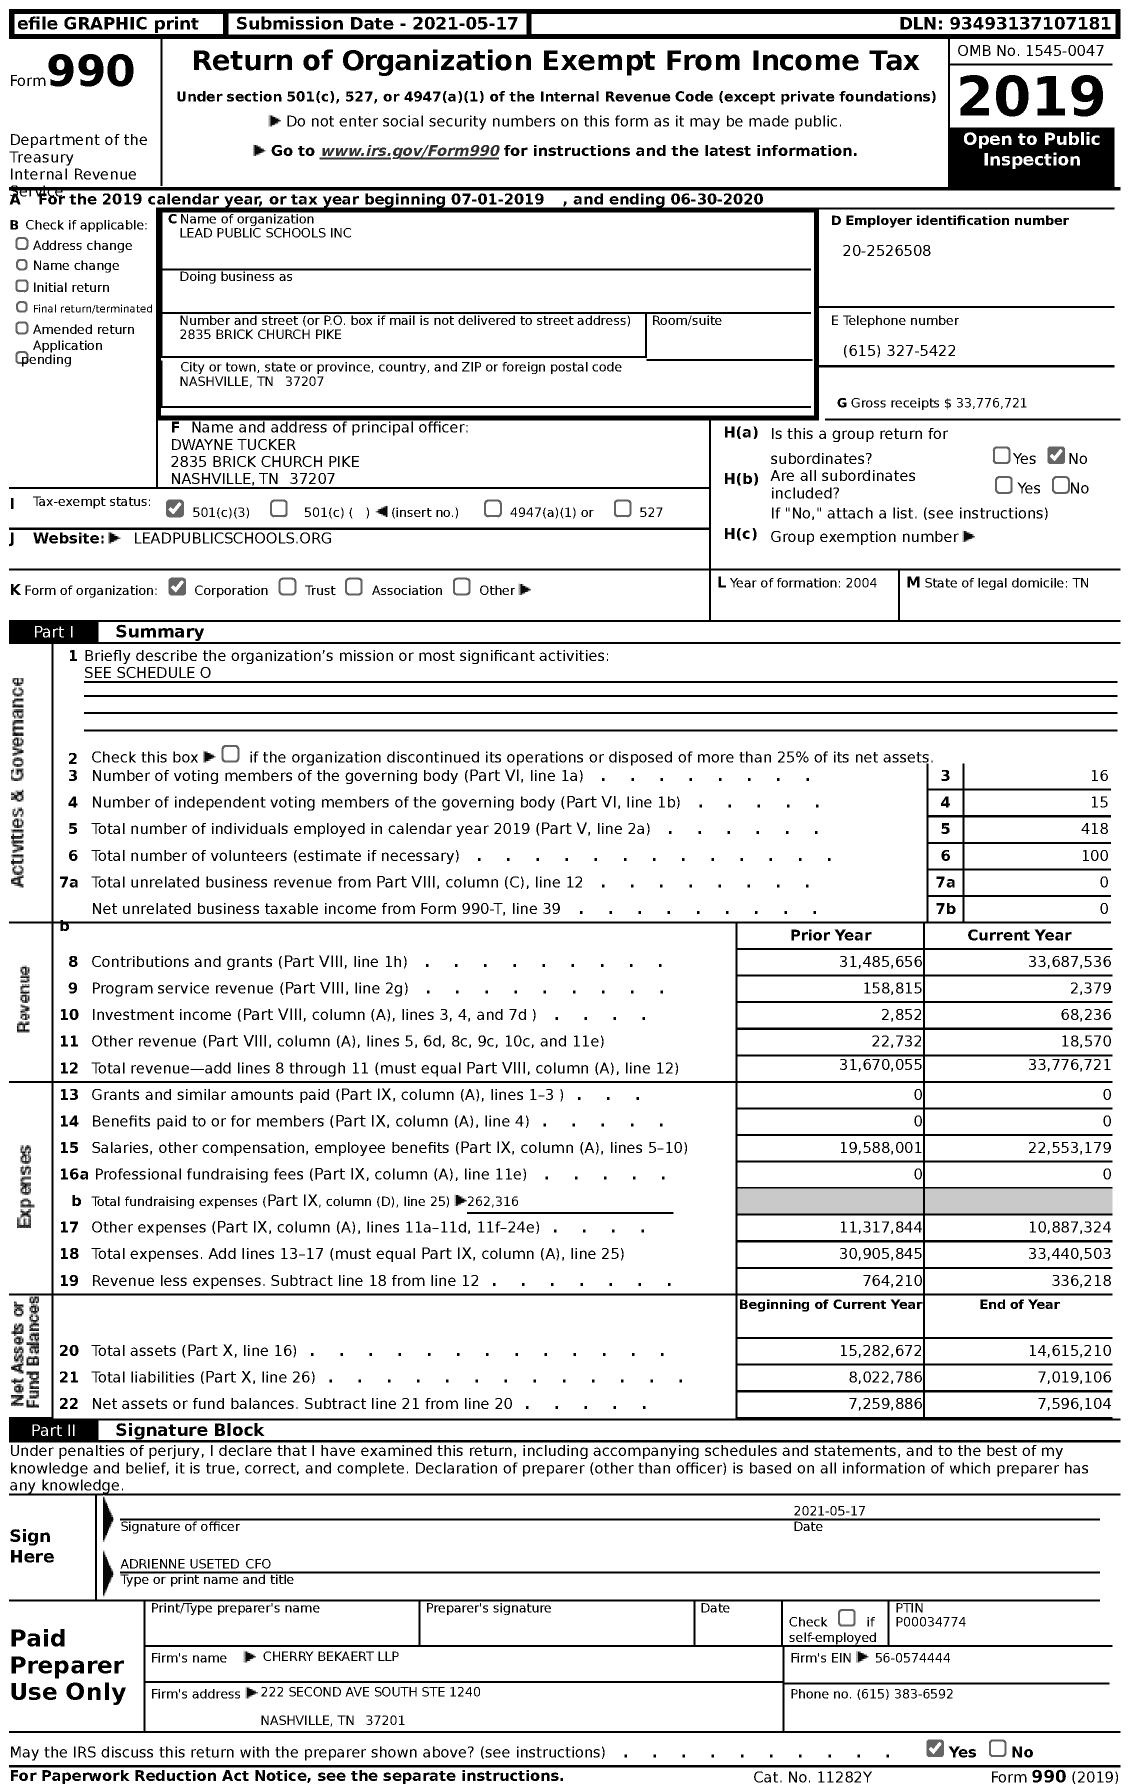 Image of first page of 2019 Form 990 for Lead Public Schools